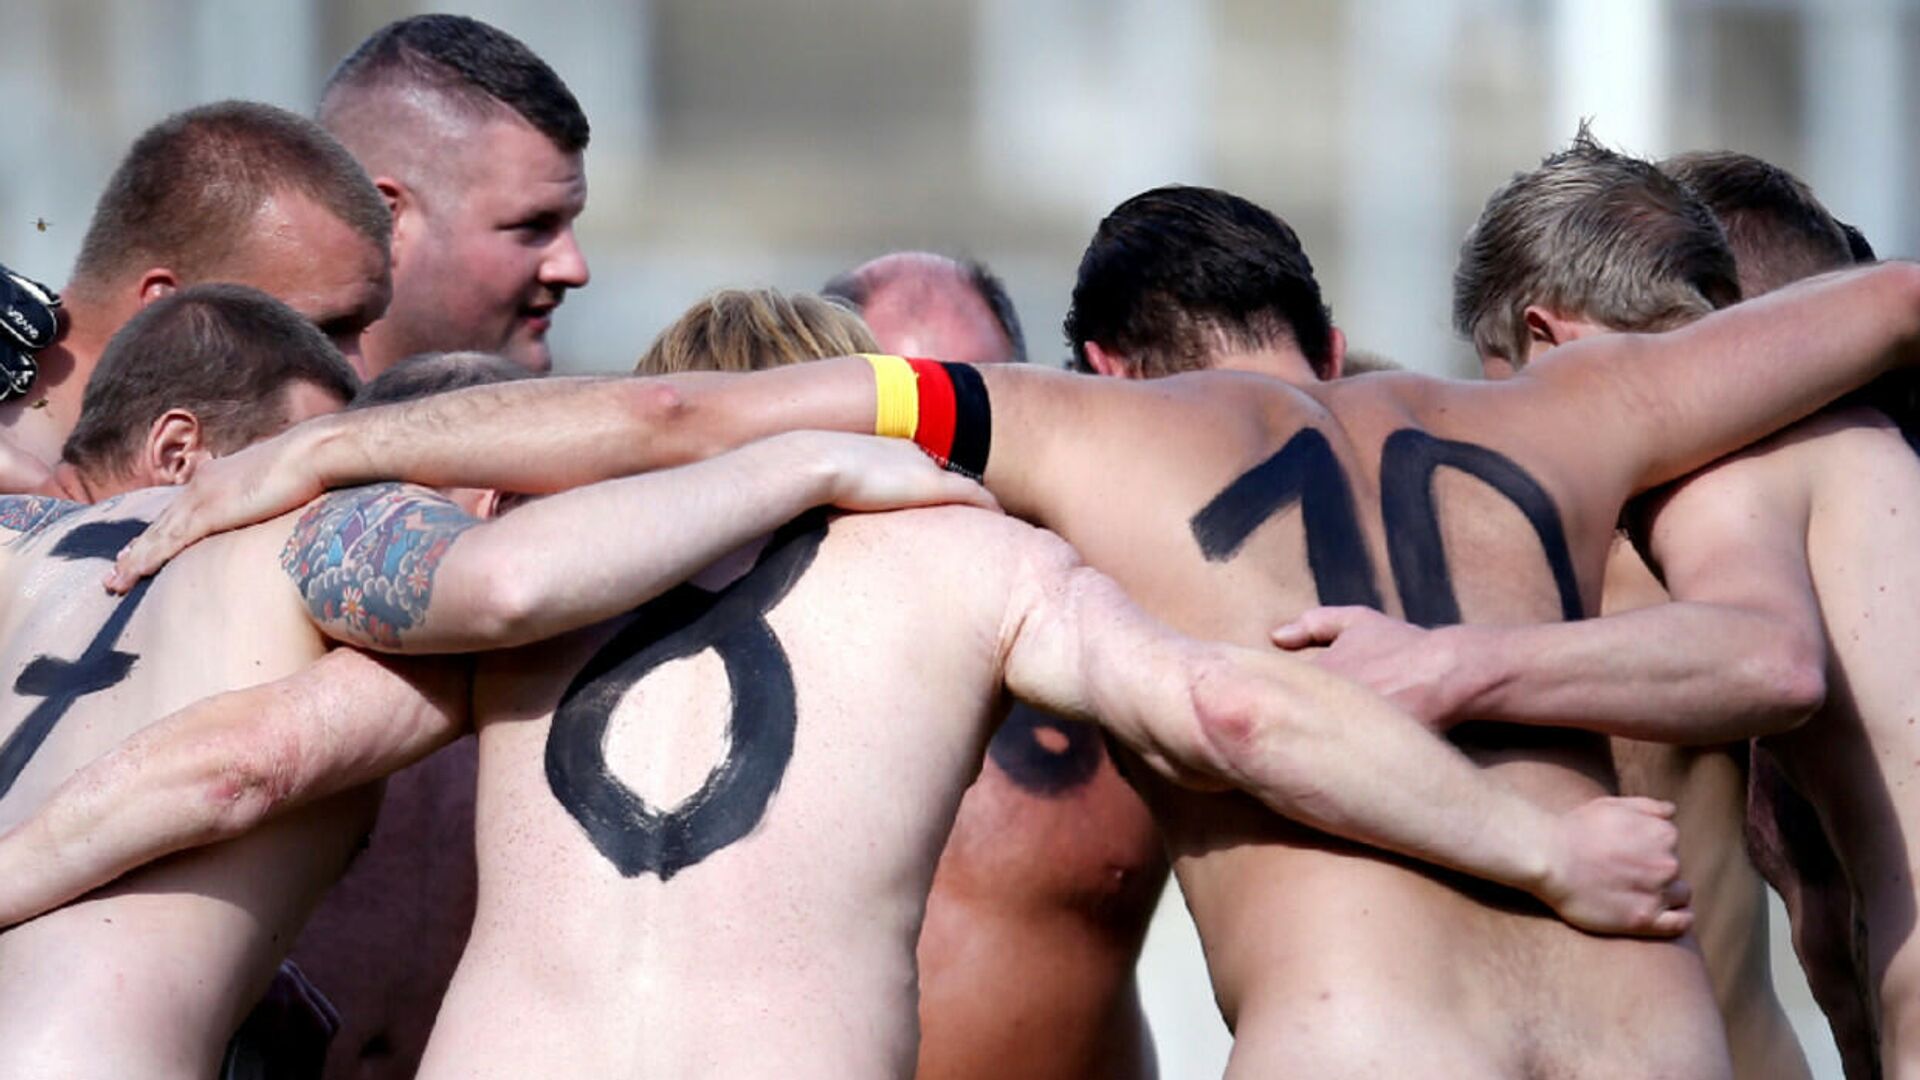 Germany's naked football team, pictured taking part in a match against the Netherlands in 2020 - Sputnik International, 1920, 09.09.2021